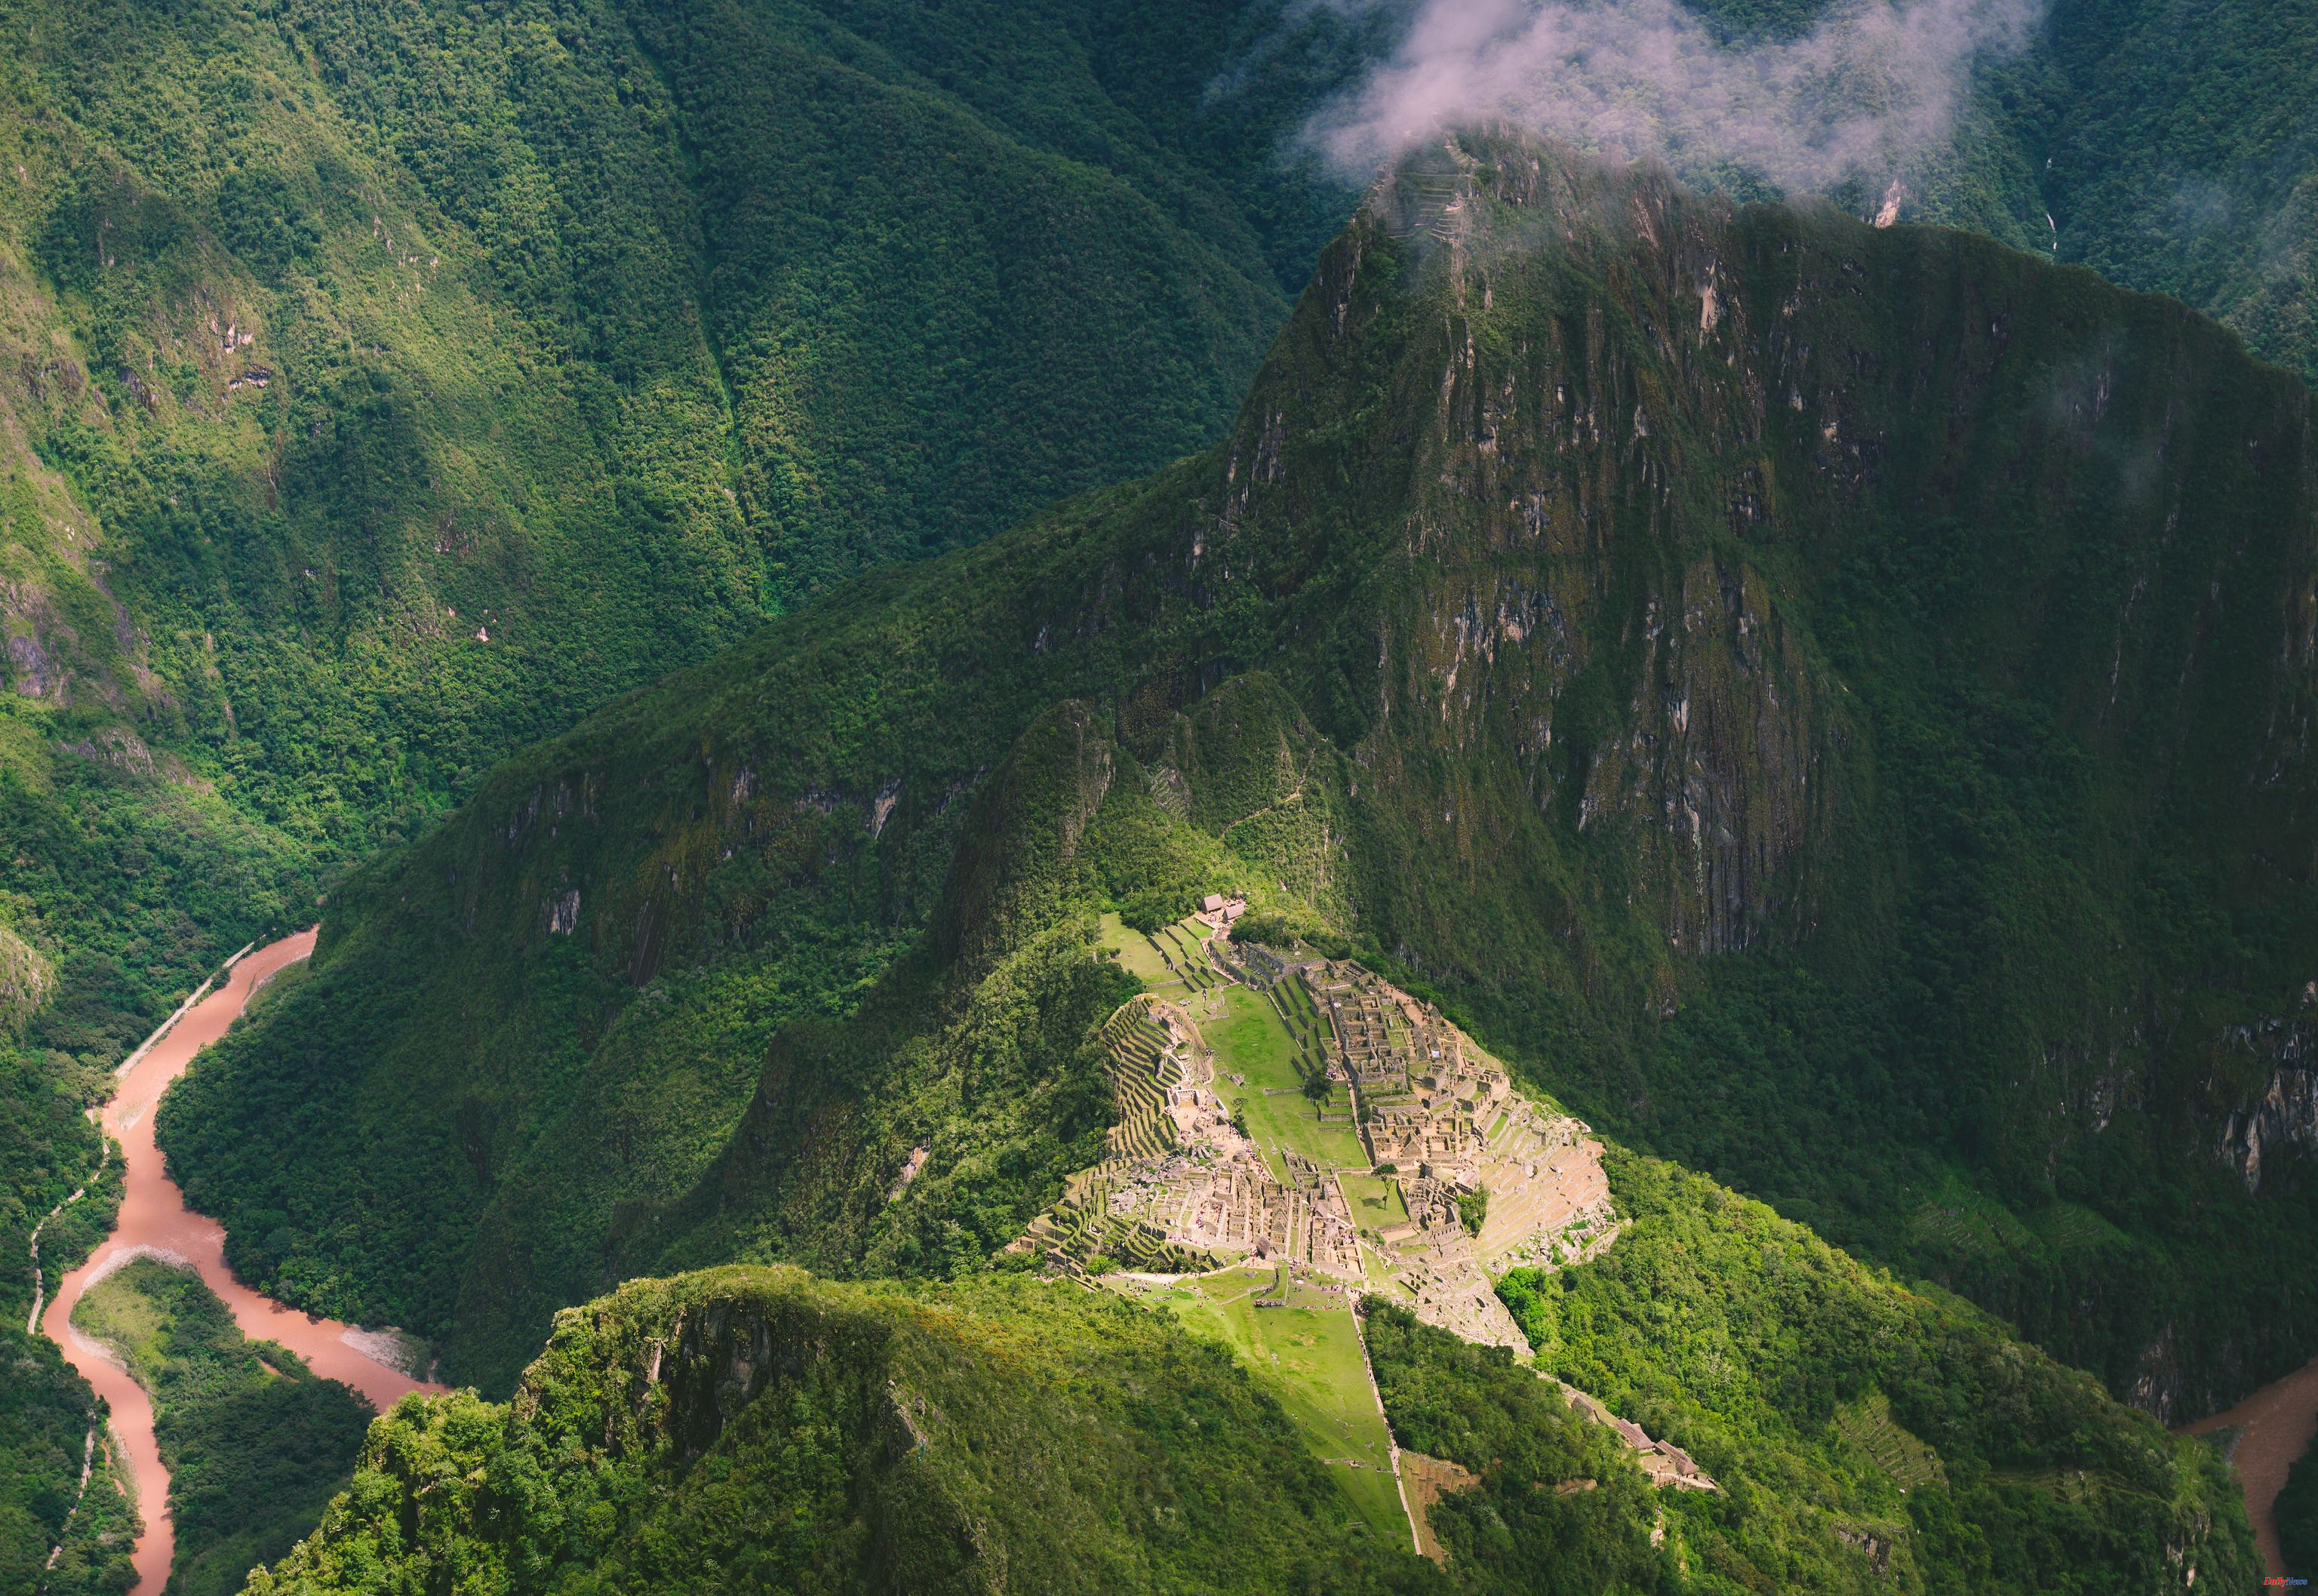 Peru They expel two European tourists for taking nude photos in Machu Picchu